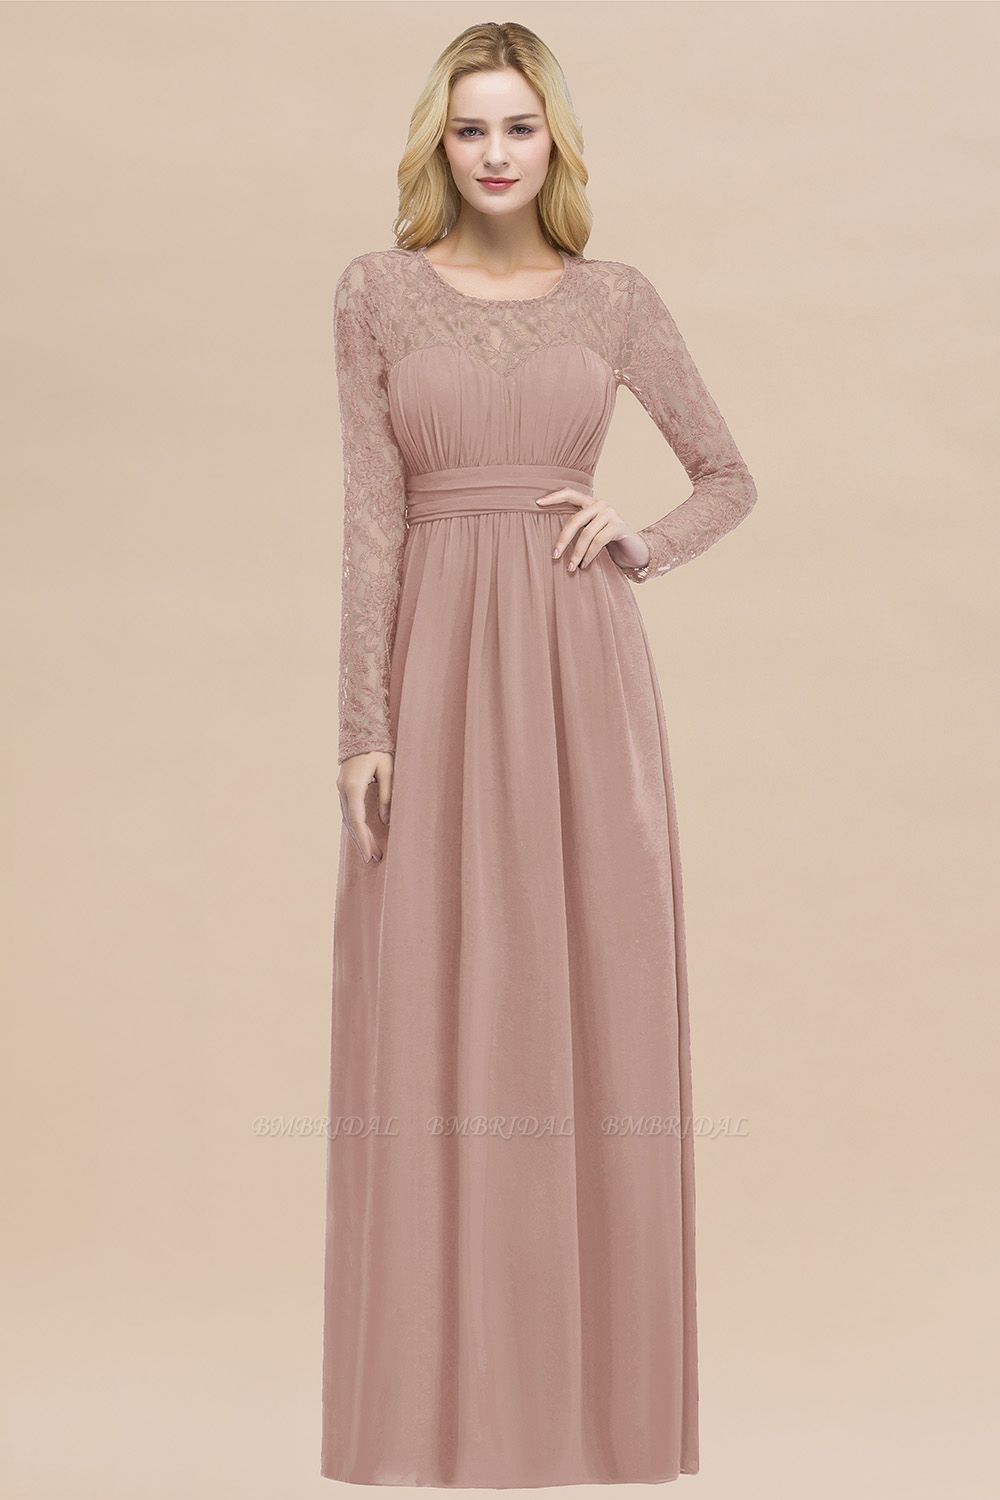 BMbridal Elegant Lace Burgundy Bridesmaid Dresses Online with Long Sleeves